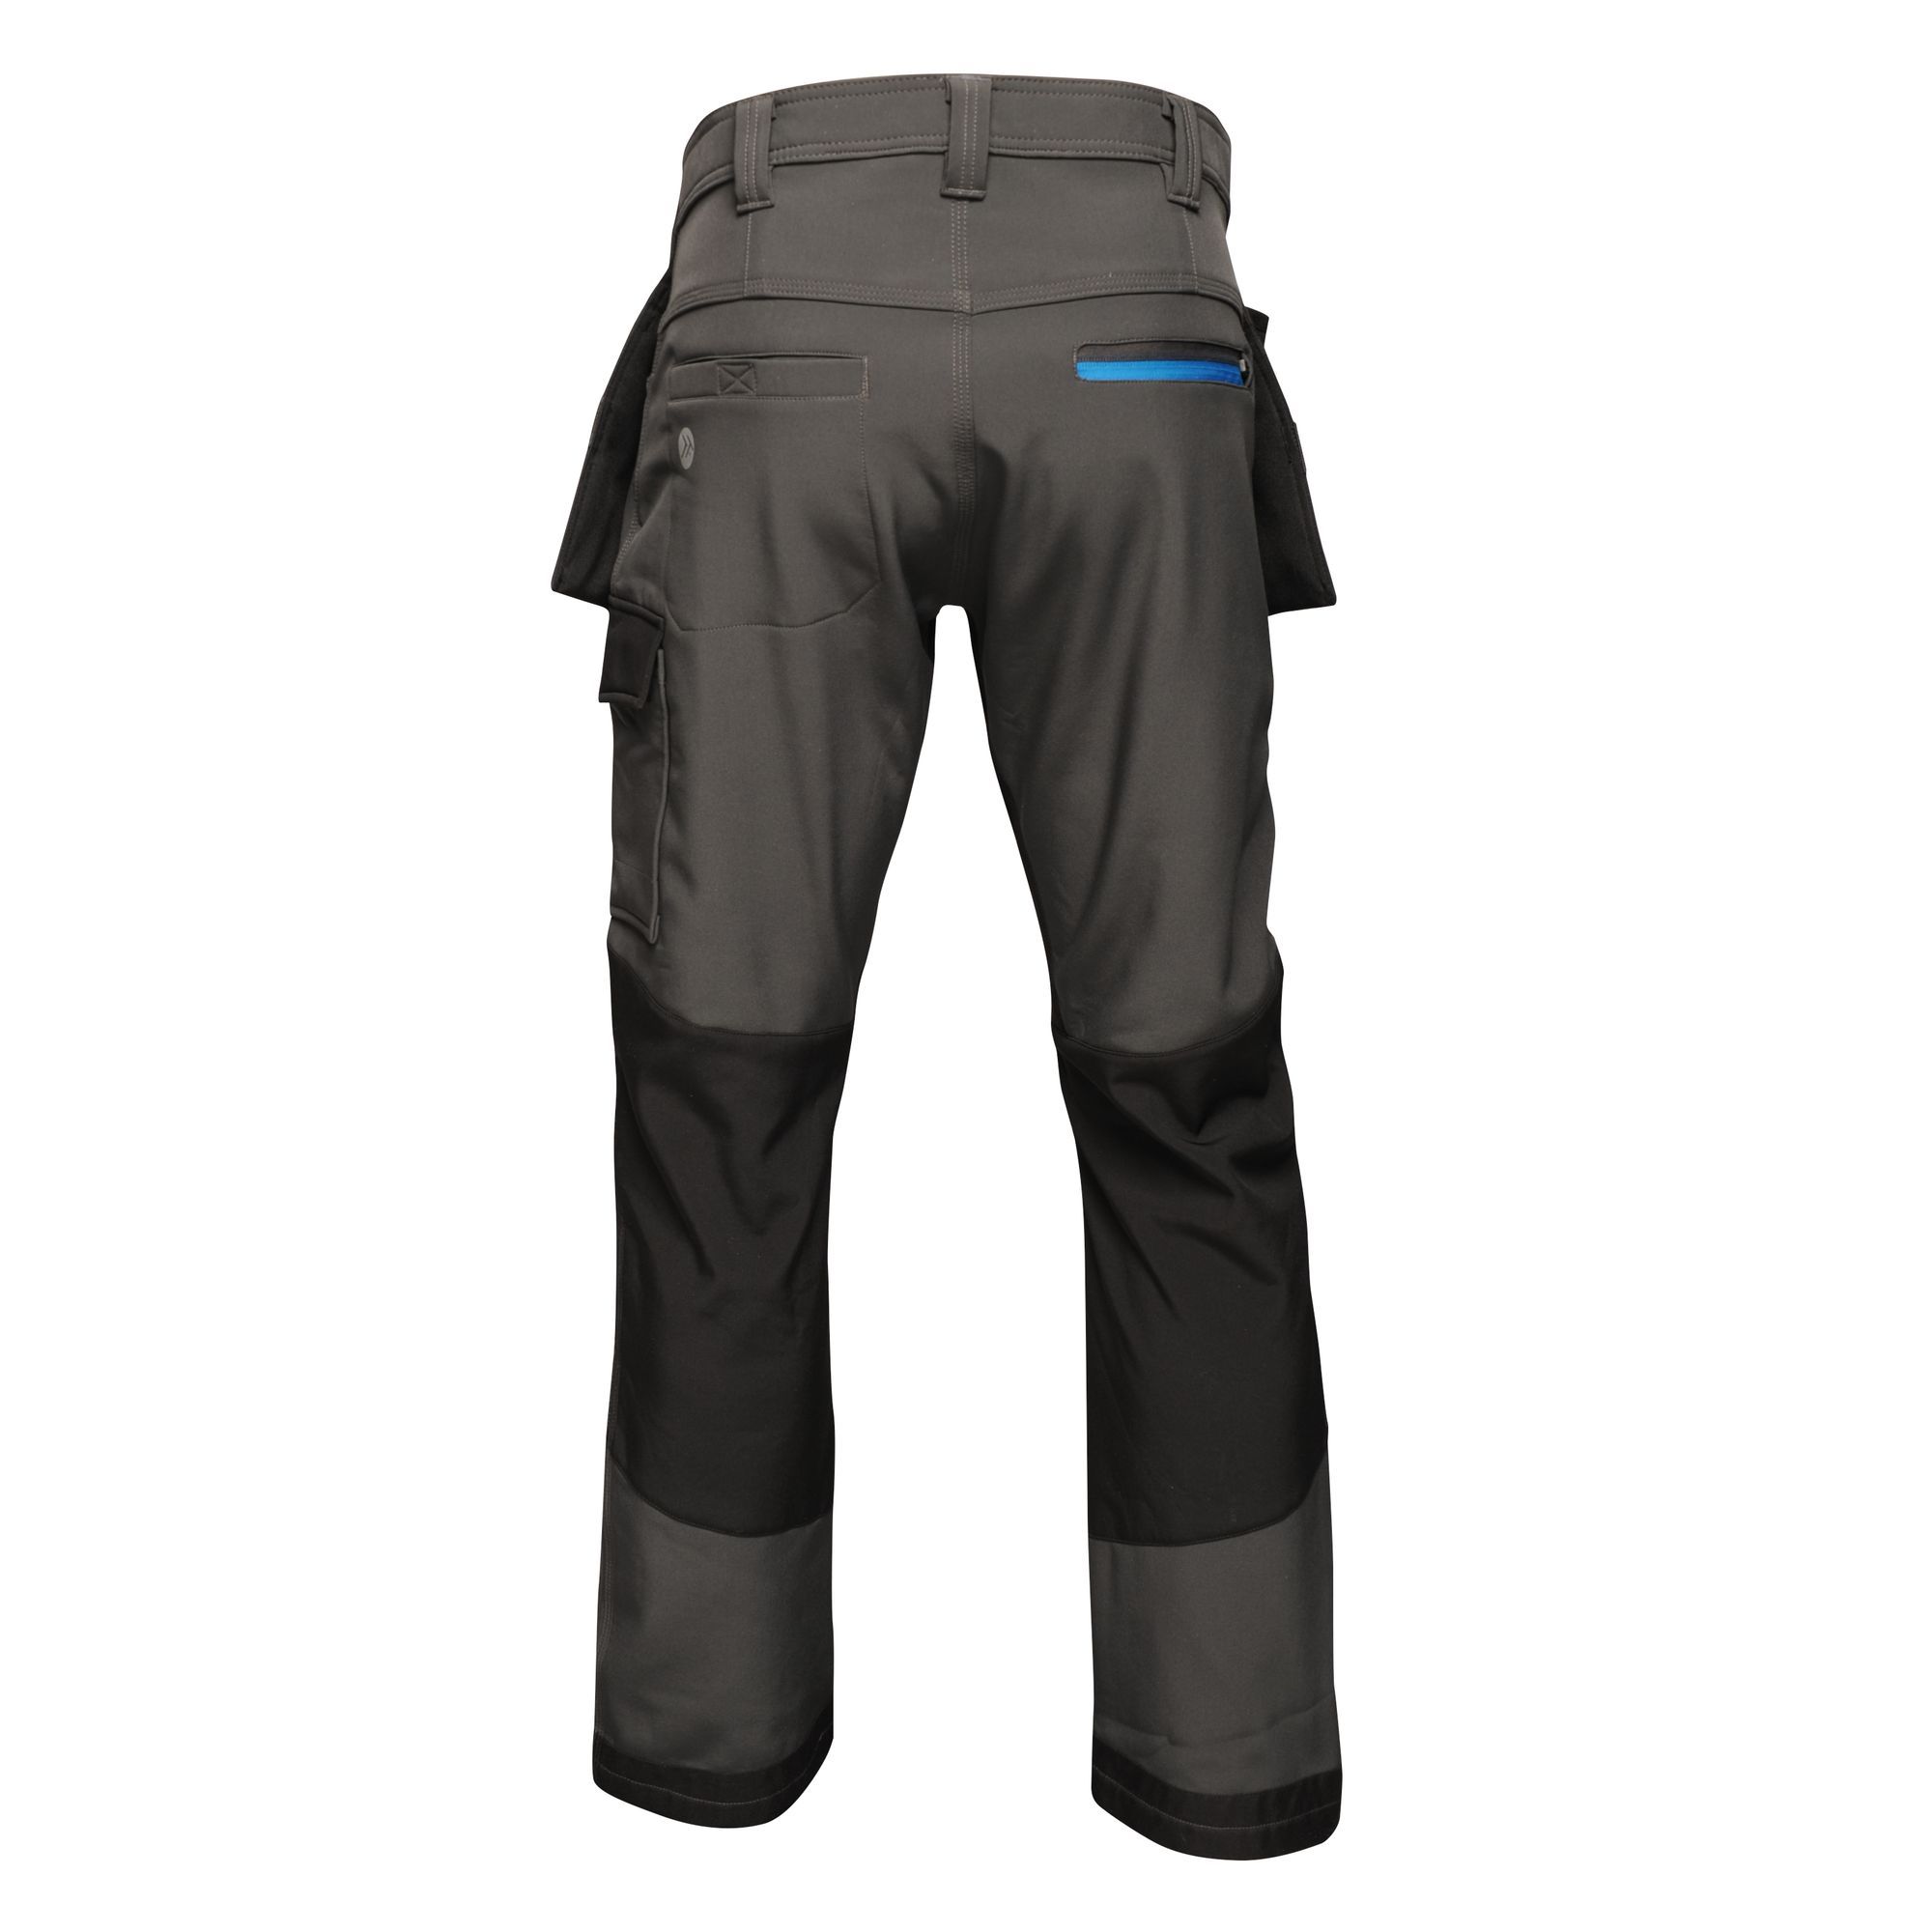 Mens work trousers with multiple compartments. Features 2 front pockets, 1 x zipped security pocket, 2 rear pockets, 1 zipped back pocket and 1 cargo leg pocket. Shank button at waist for extra strength. Crotch gusset for greater movement. Belt loops, Slim fit design, reinforced hem overlays.